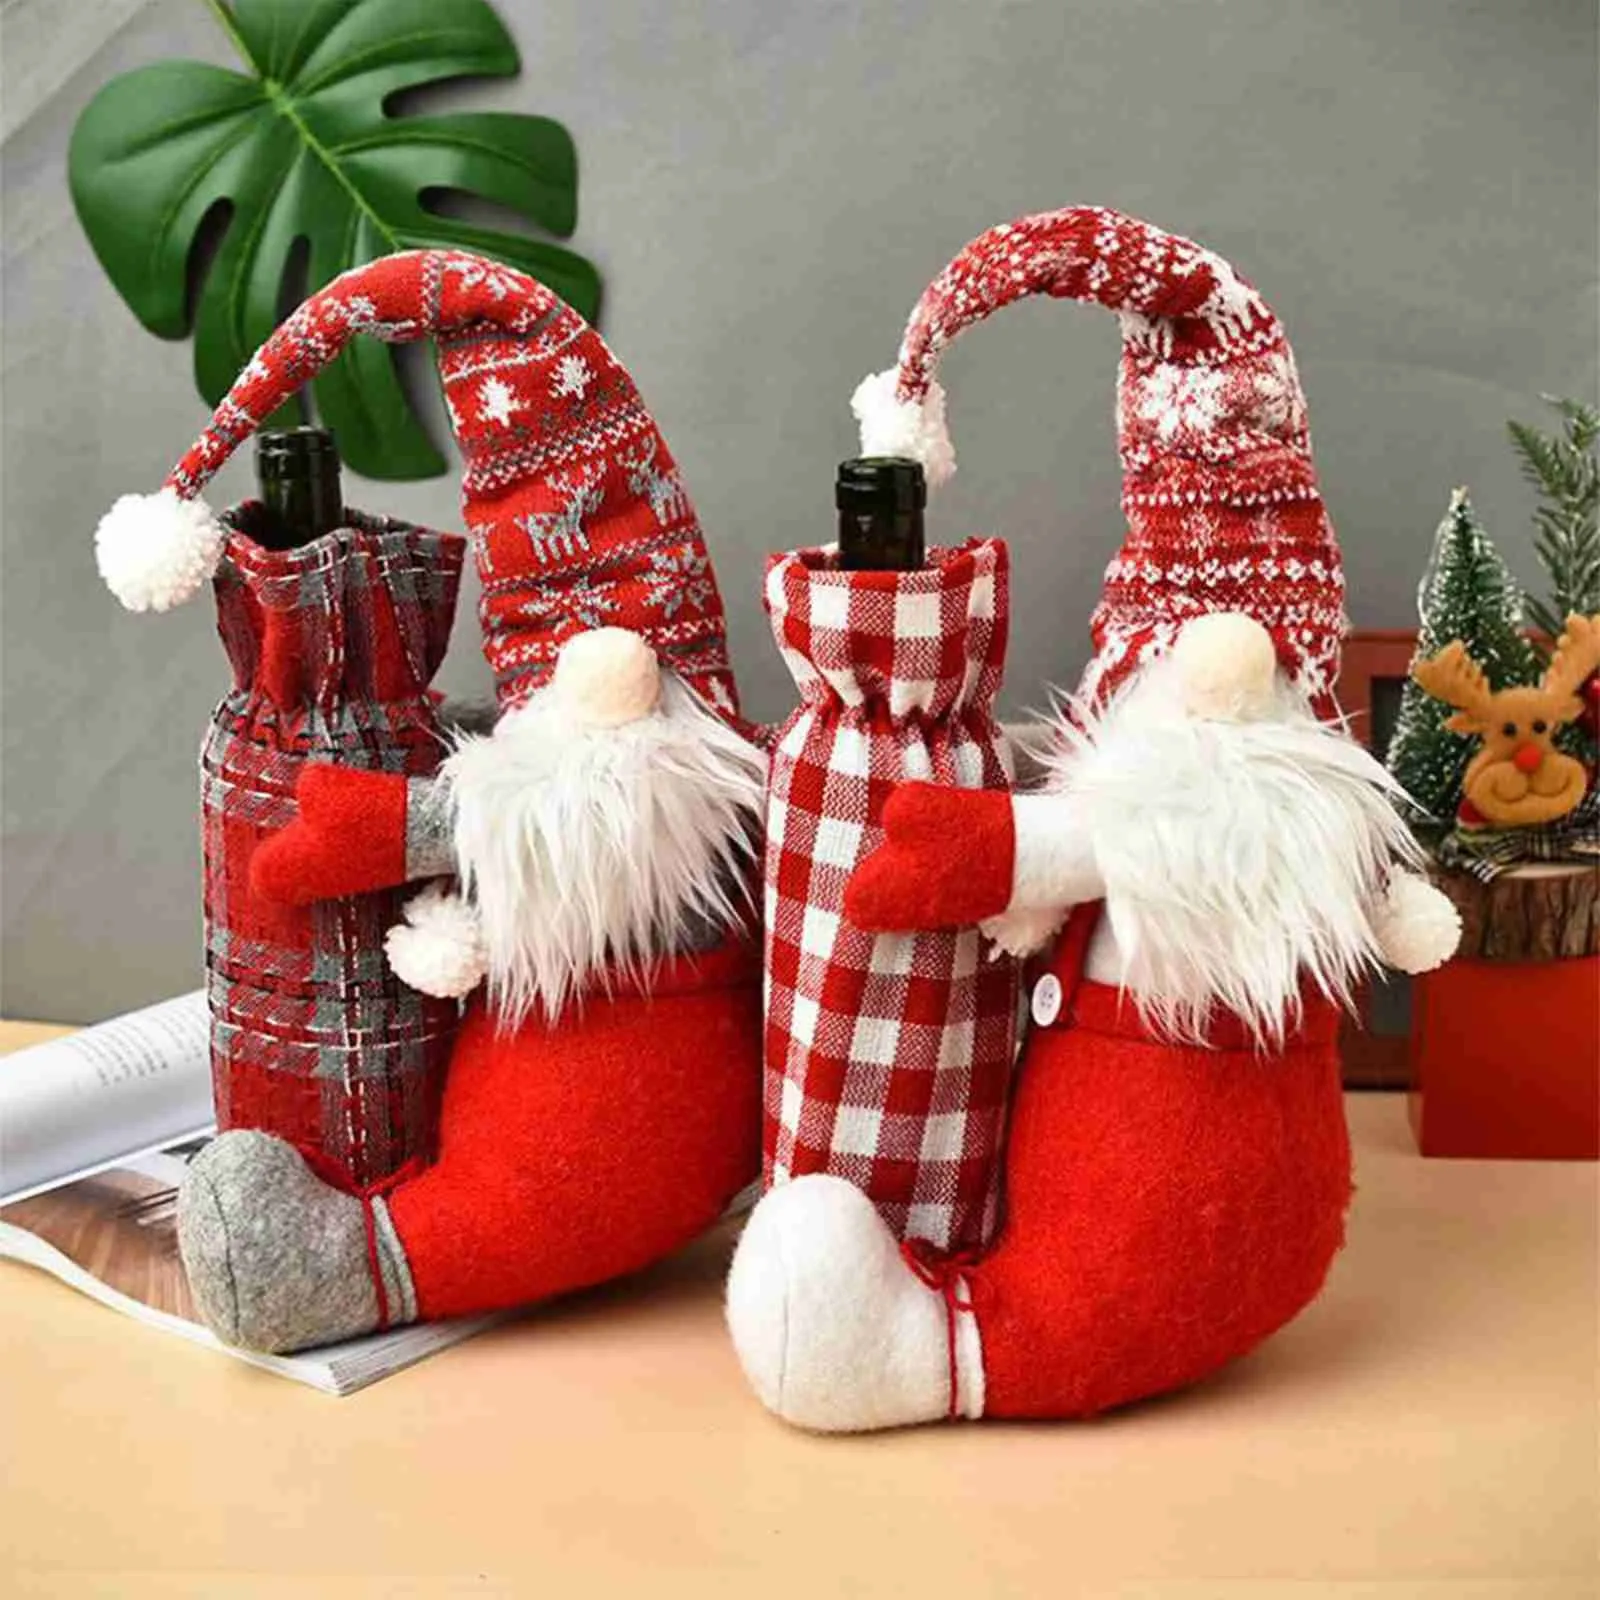 Festival Wine Bottle Cover Bags Cartoon Pattern Home Party Santa Christmas Gift 